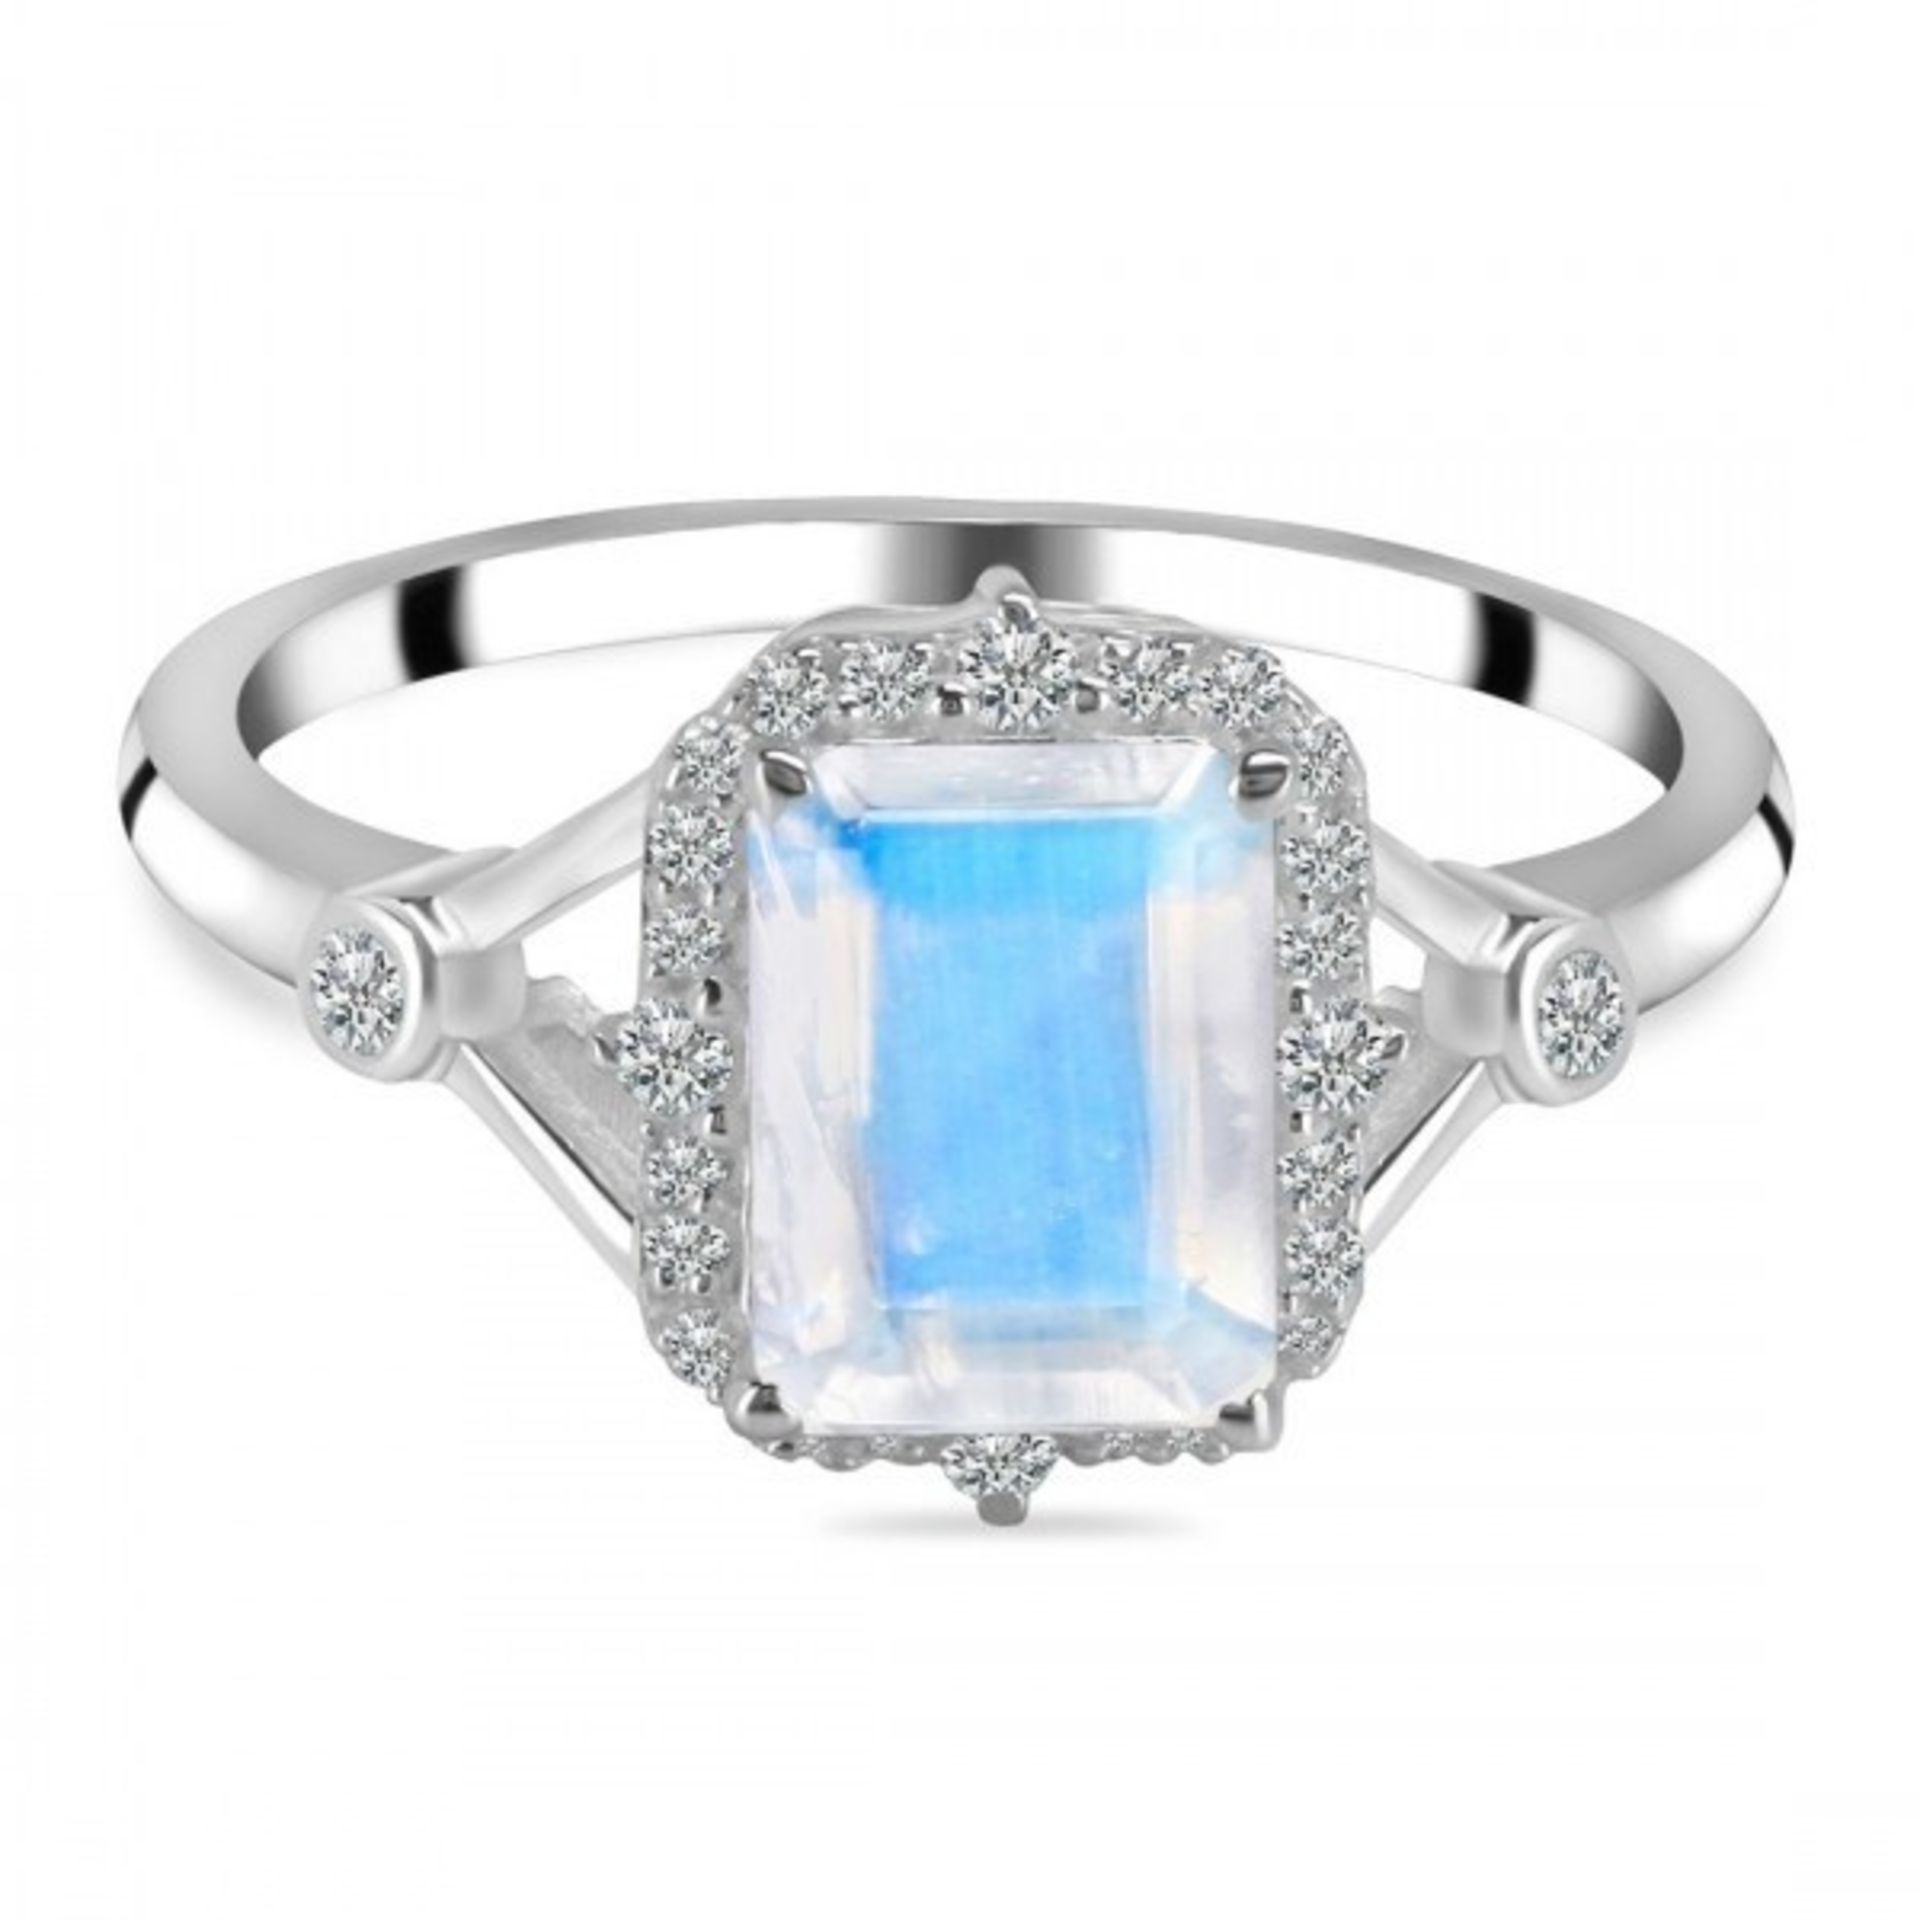 A 925 silver ring set with an emerald cut moonstone and white stones, (N.5).